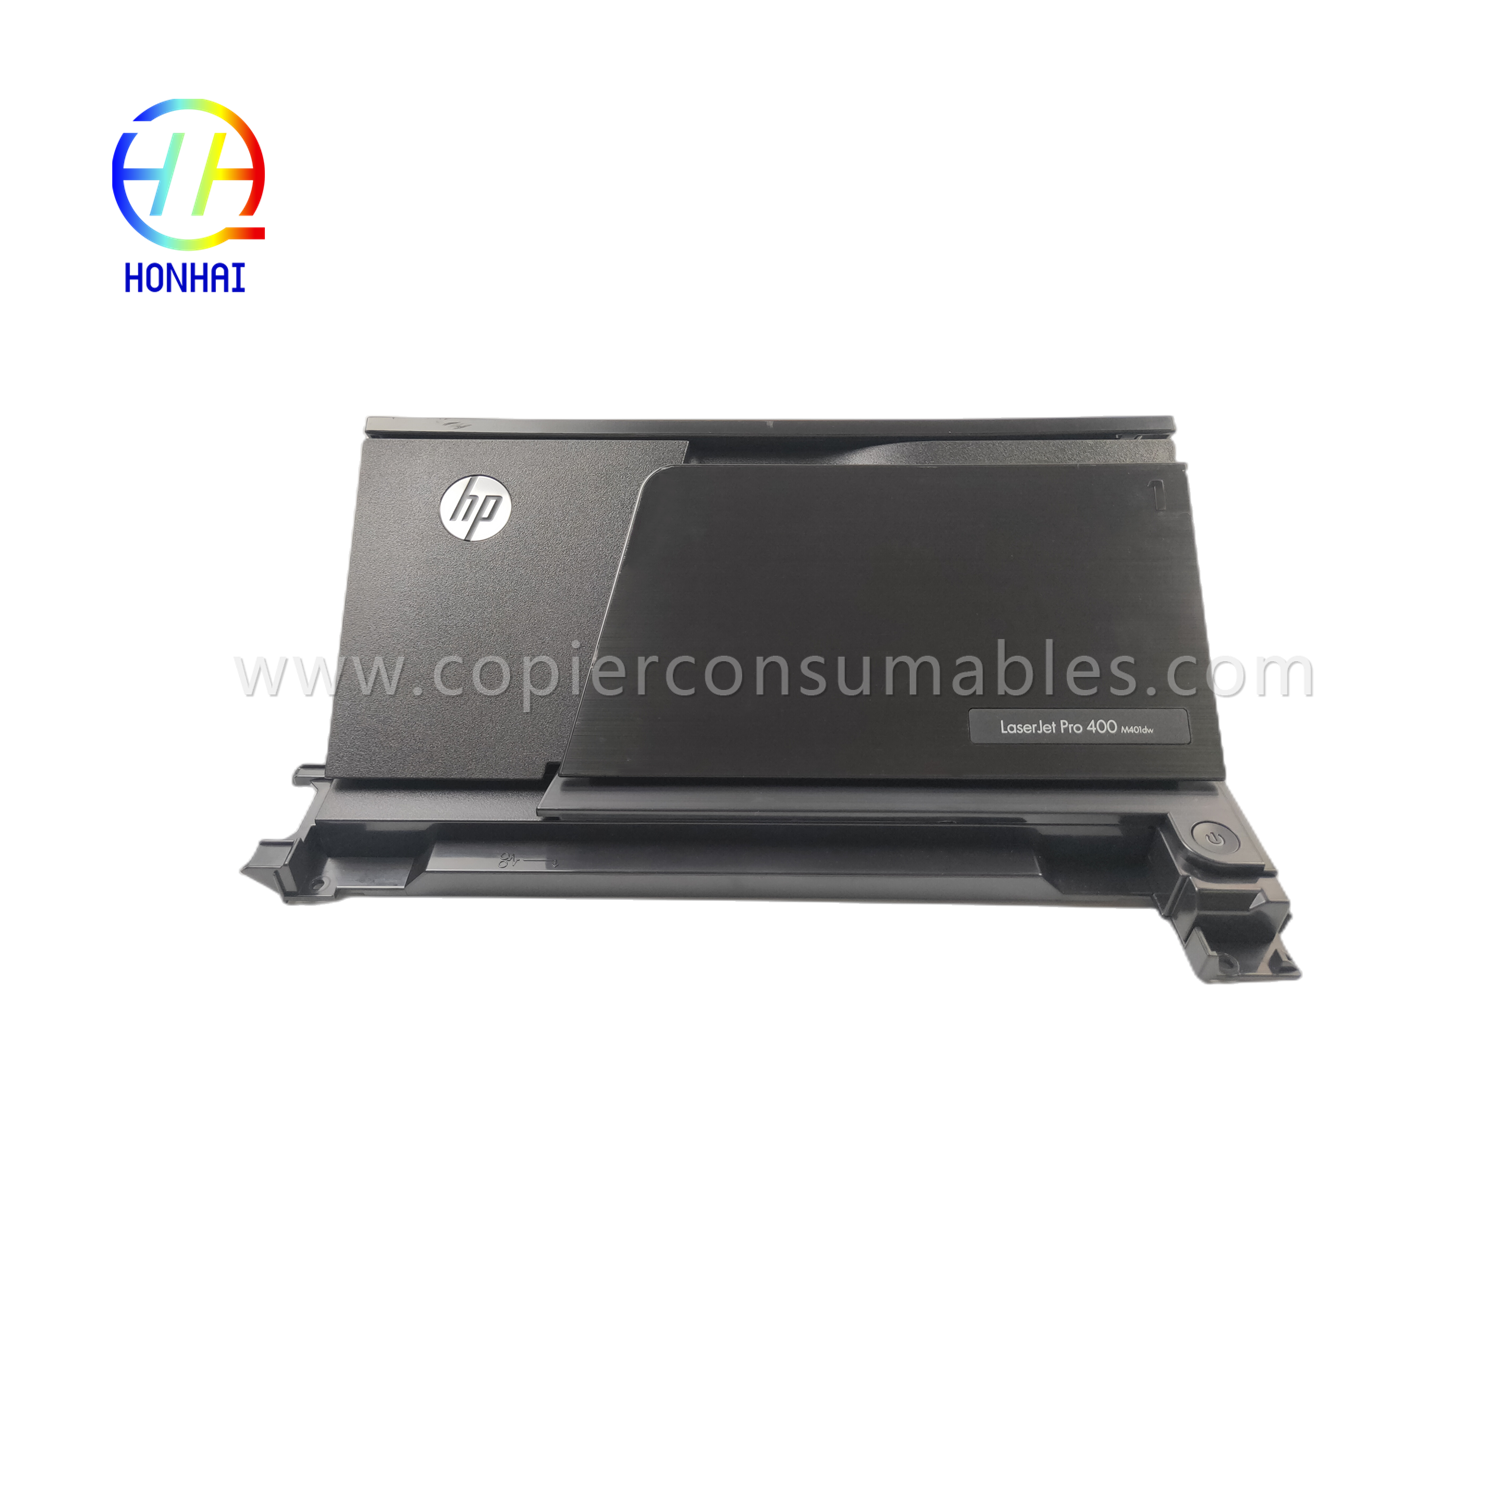 https://c585.goodao.net/front-door-for-hp-pro400-m401-hp401dne-401d-first-tray-manual-feeder-front-cover-product/